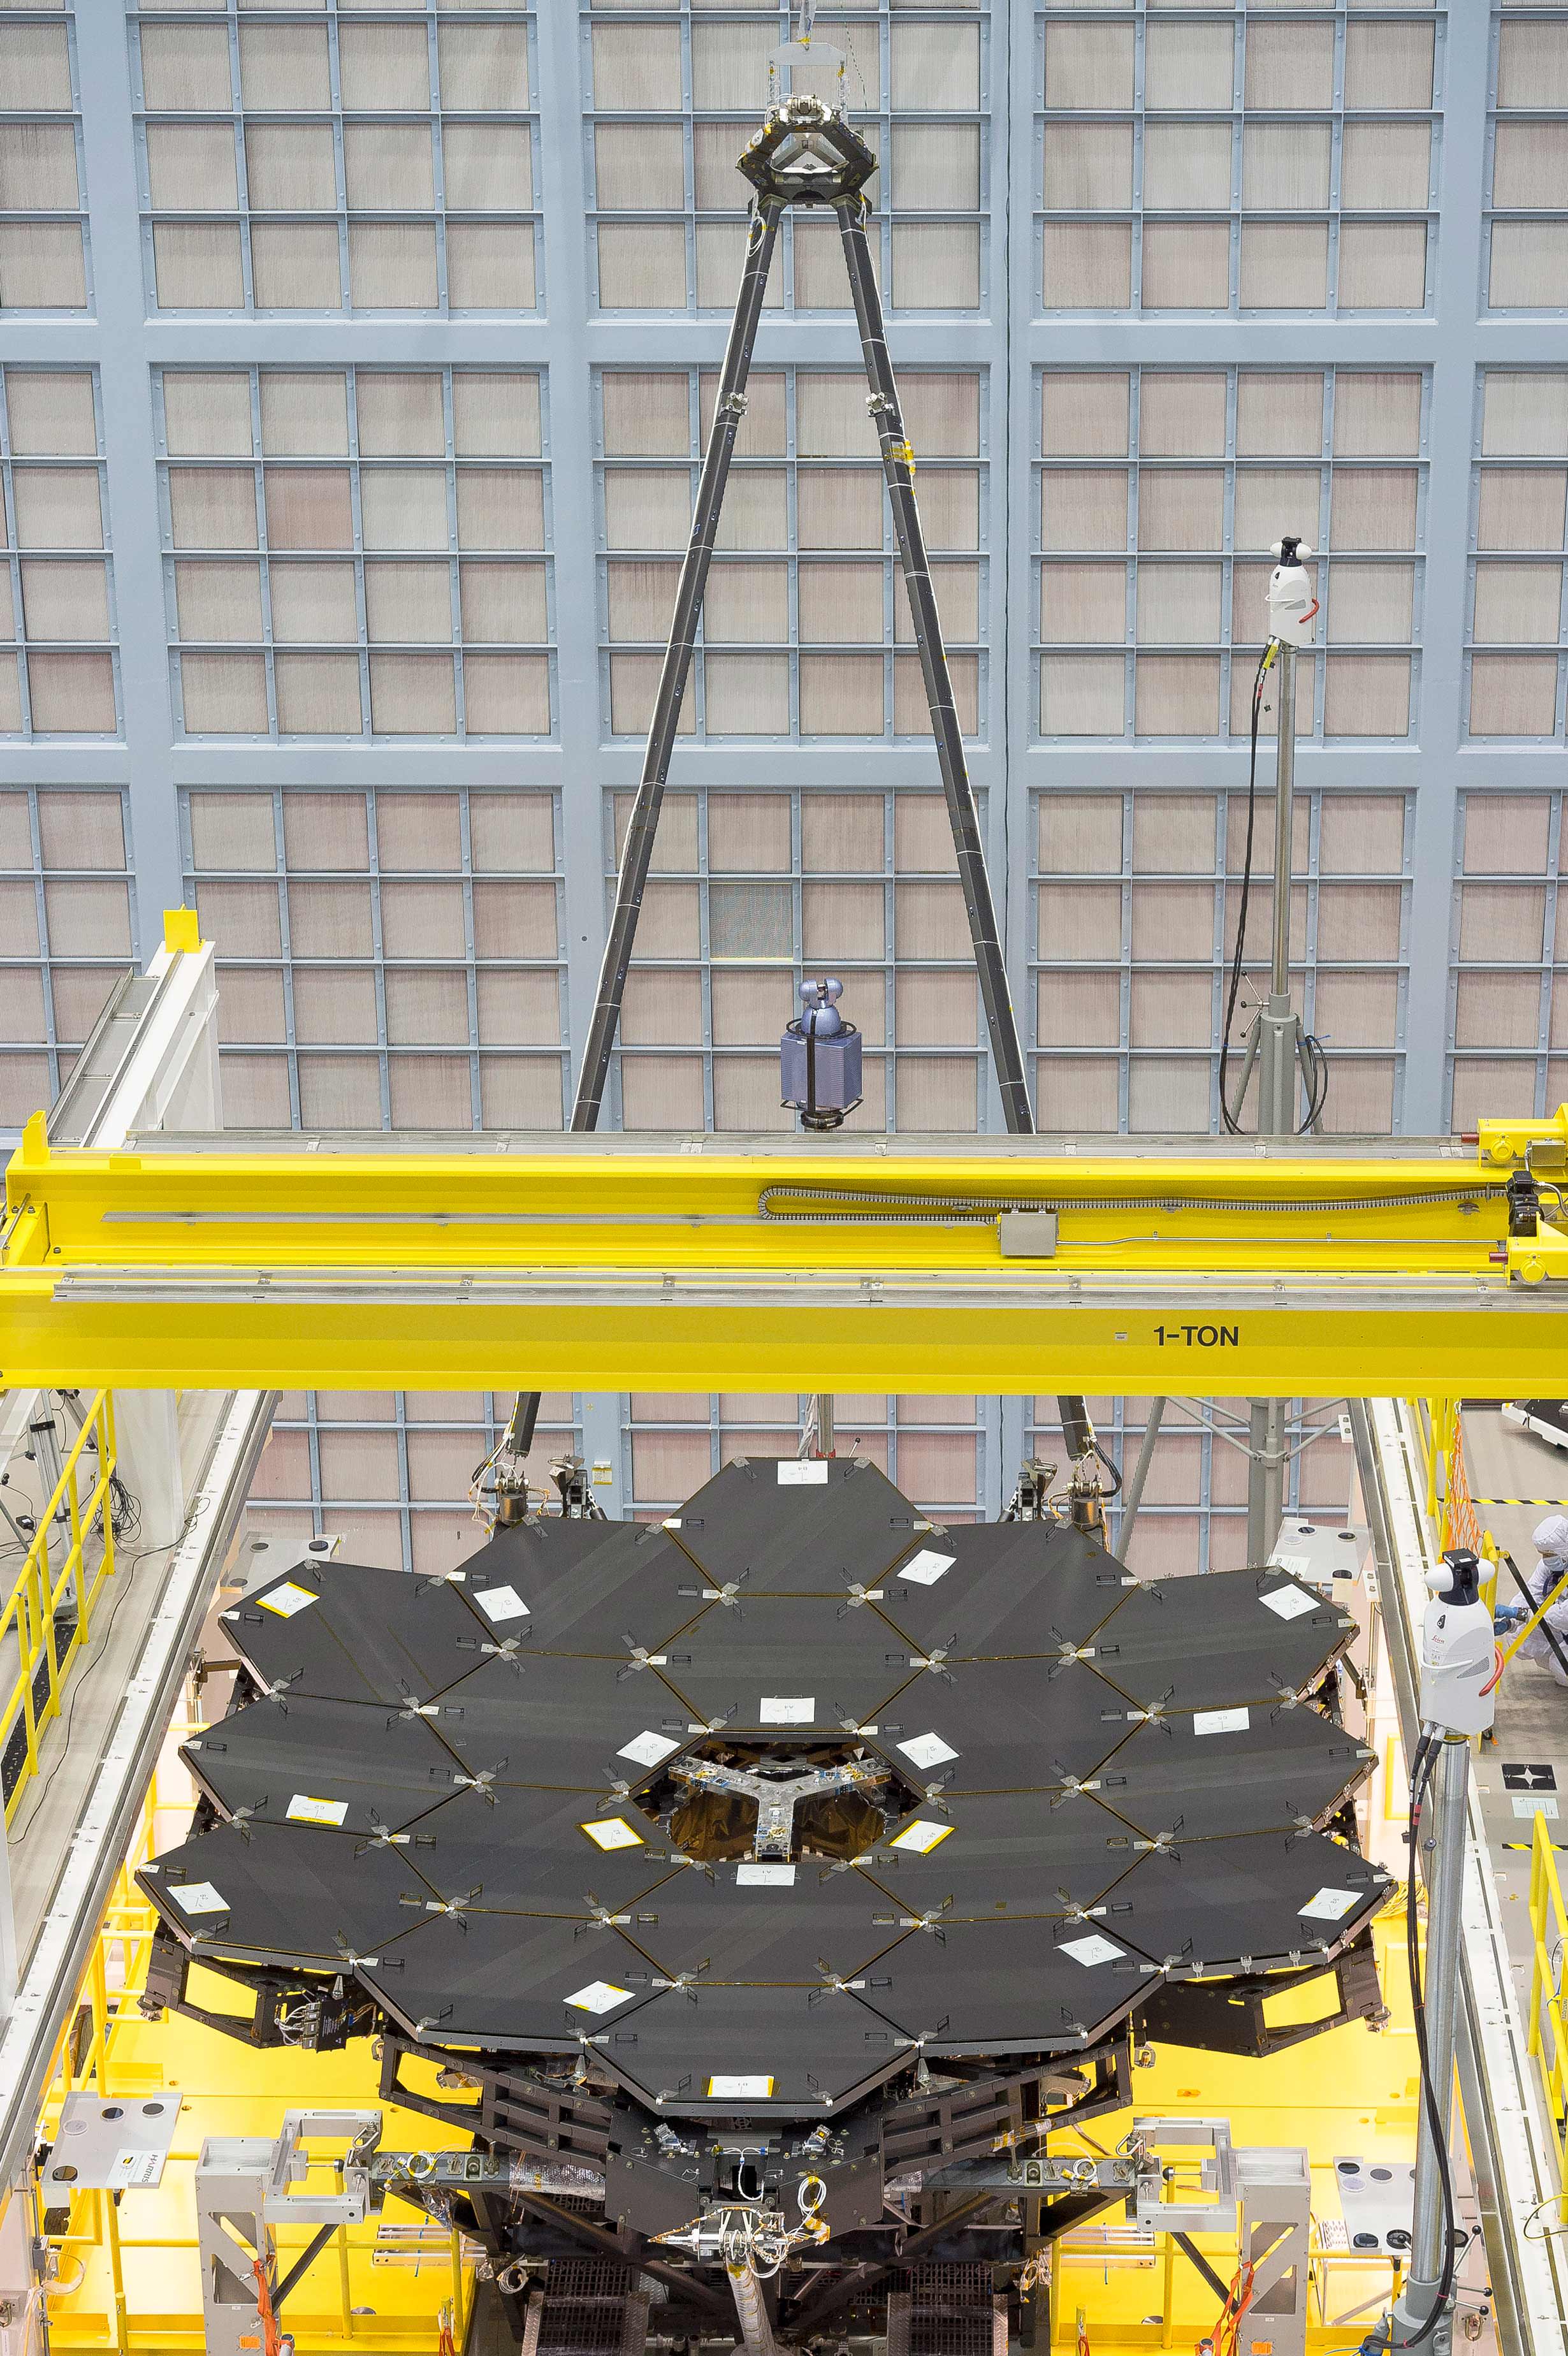 In this rare view, the James Webb Space Telescope's 18 mirrors are seen fully installed on the James Webb Space Telescope structure at NASA's Goddard Space Flight Center in Greenbelt, Maryland.  Credits: NASA/Chris Gunn